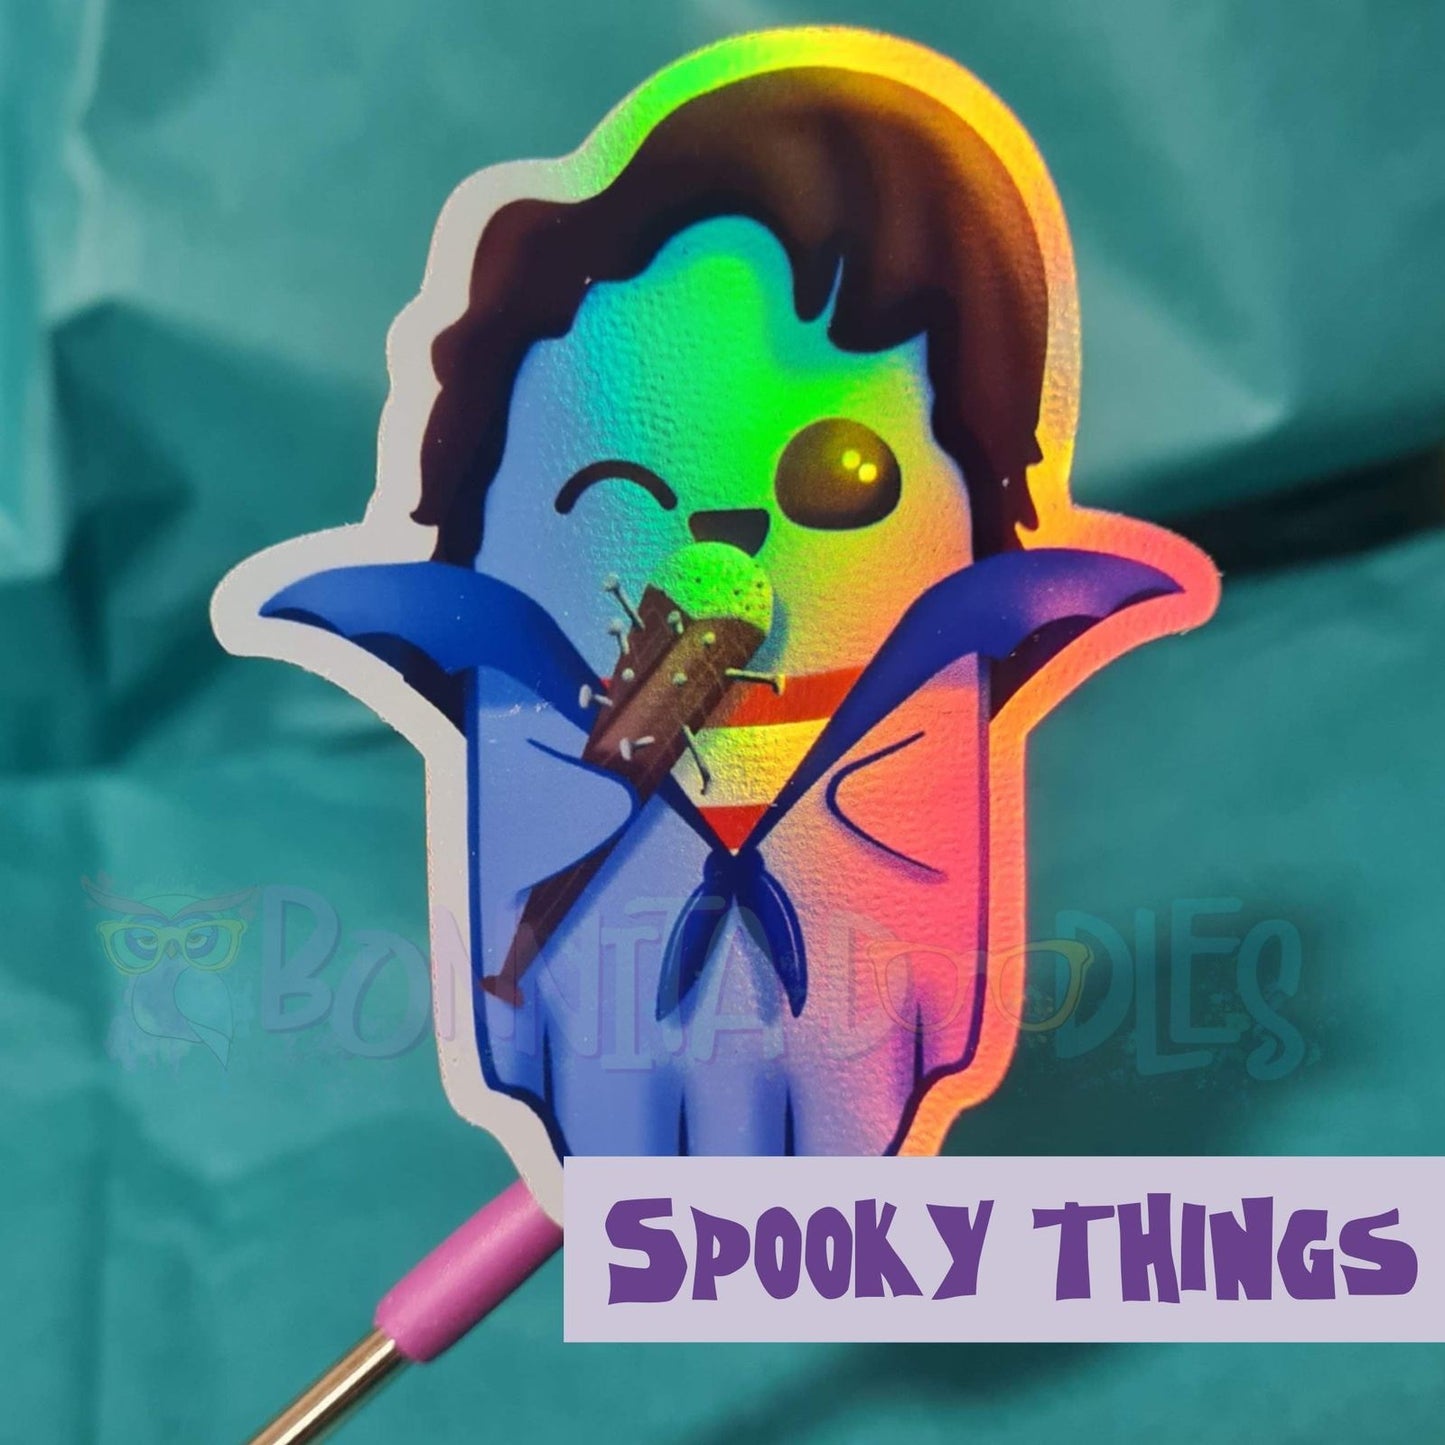 Spooky things - gang stickers- meet the crew